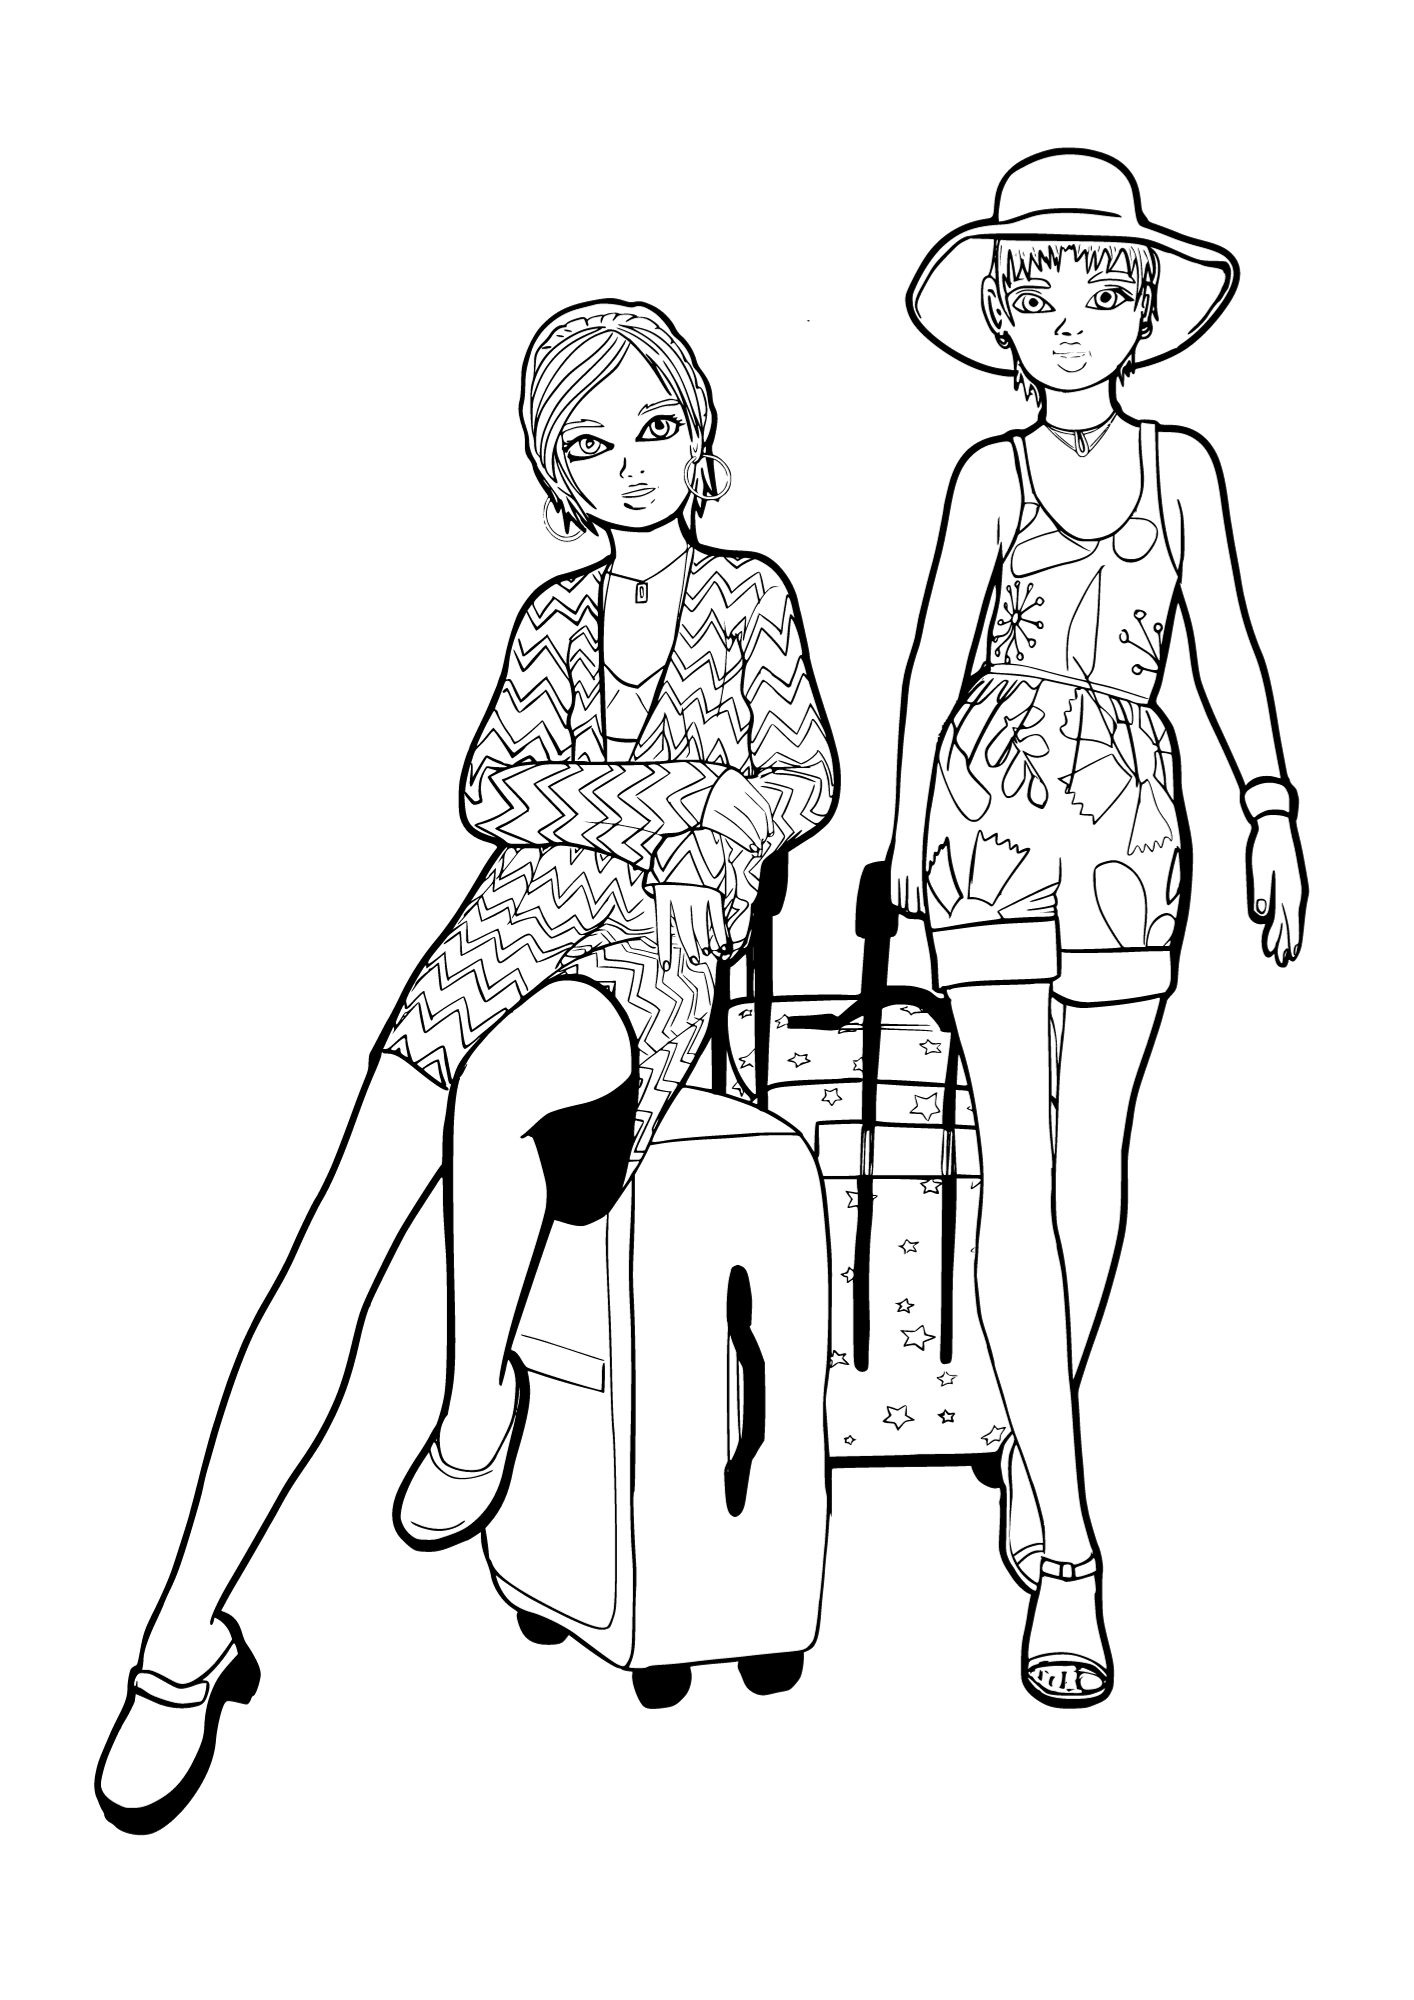 Vacation friends coloring sheet